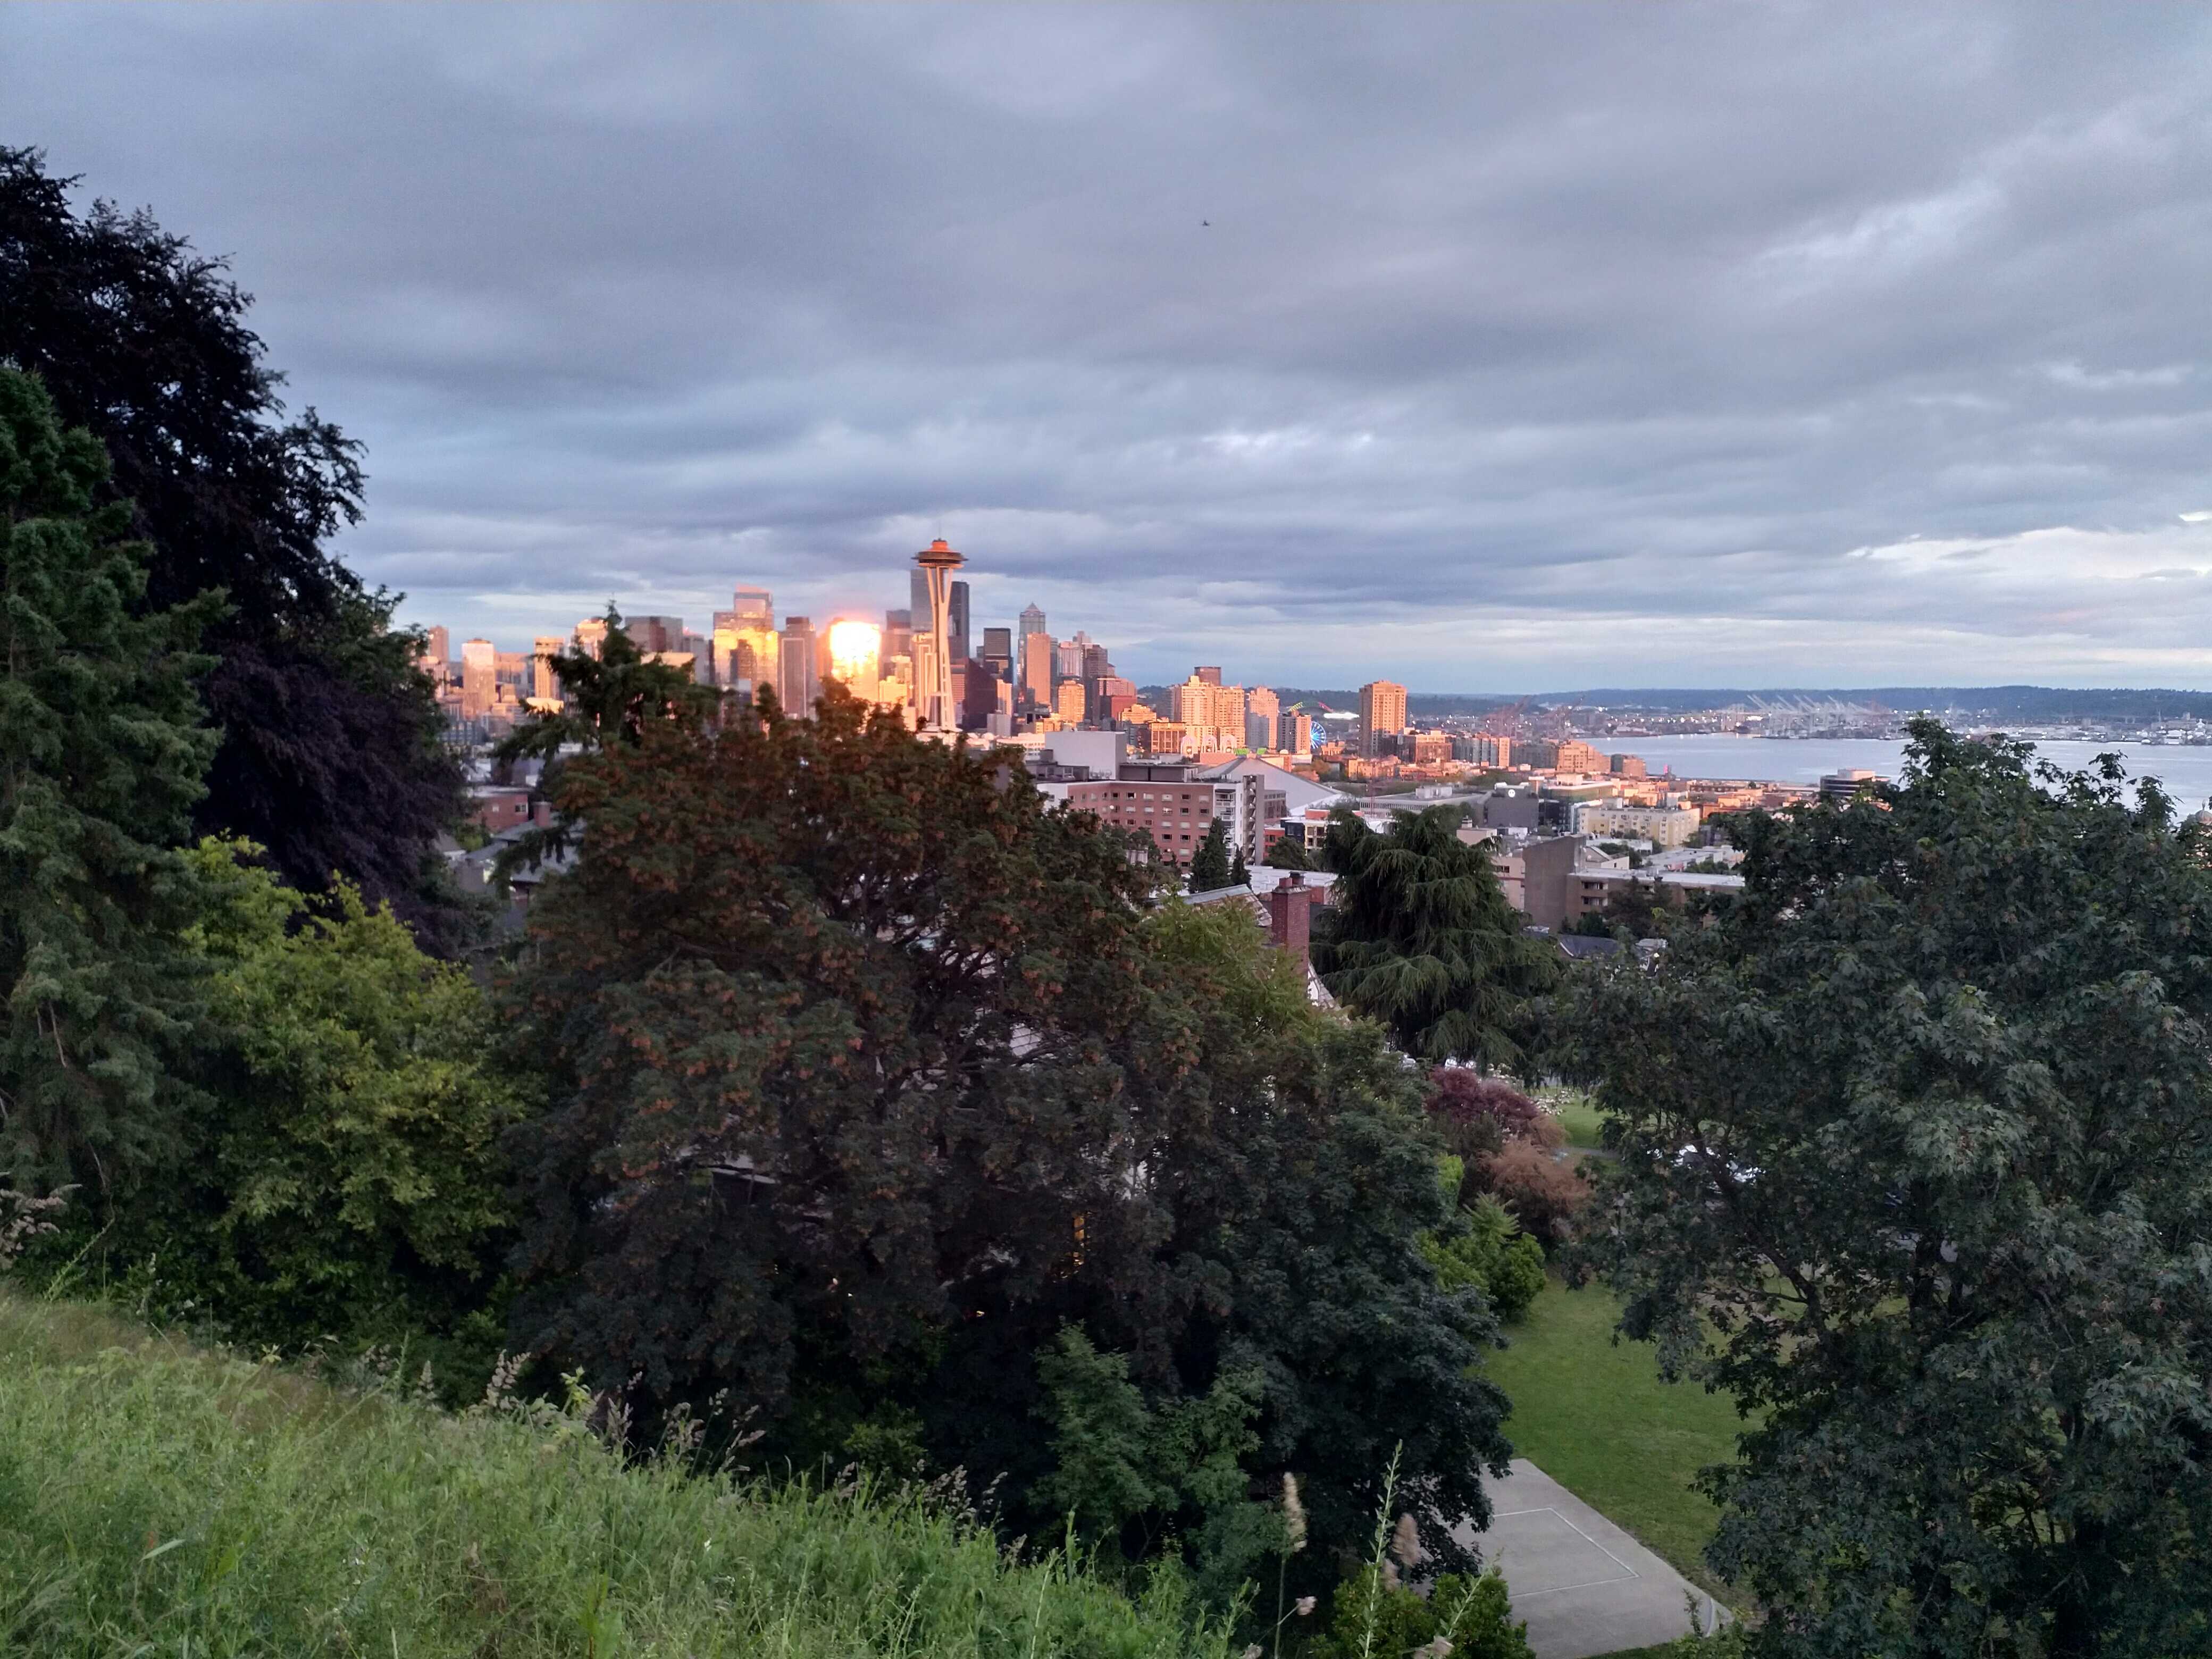 Seattle&rsquo;s skyline as seen from Kerry Park.